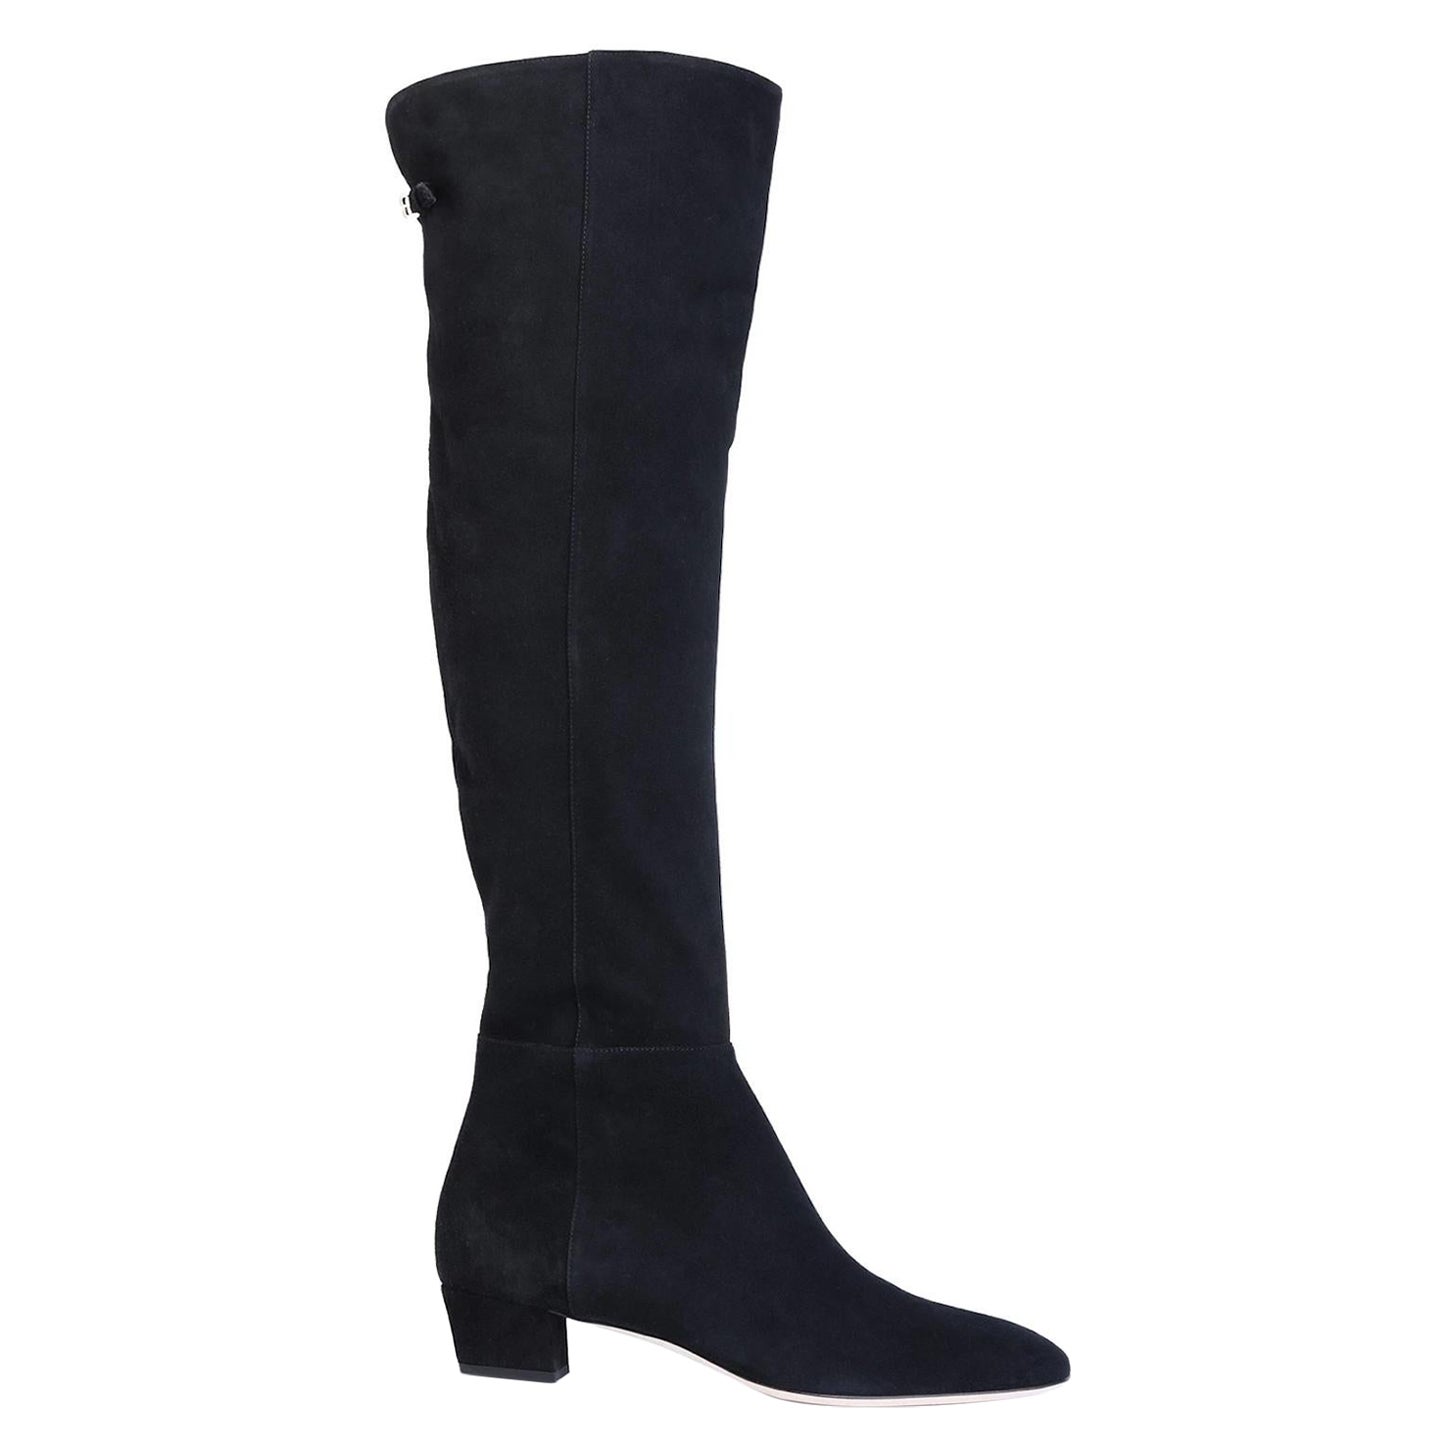 Sergio Rossi Black Suede Over the Knee Boots (40 EU)